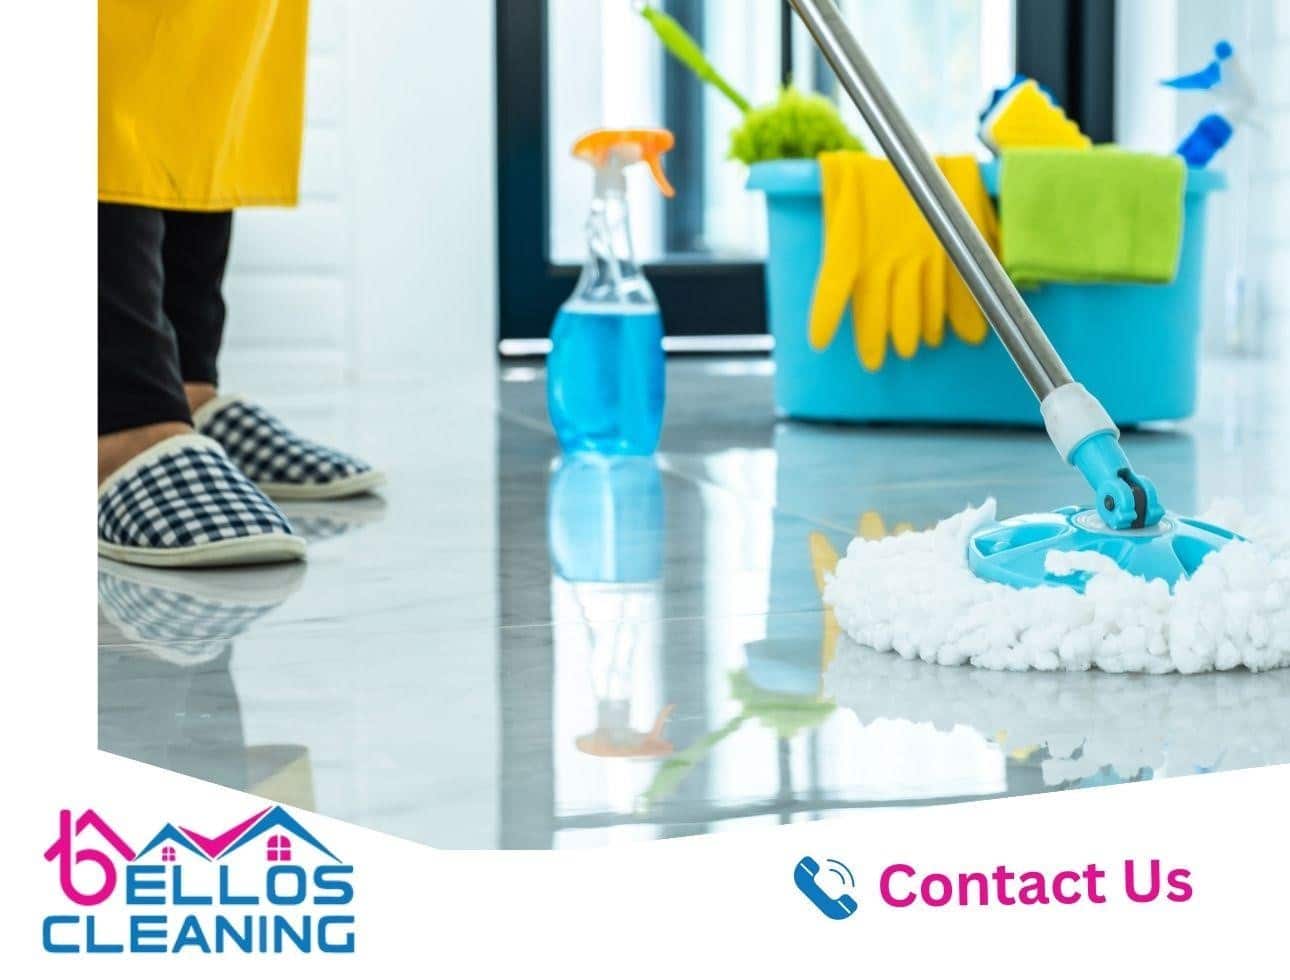 Work with Bello's Cleaning for professional house cleaning services